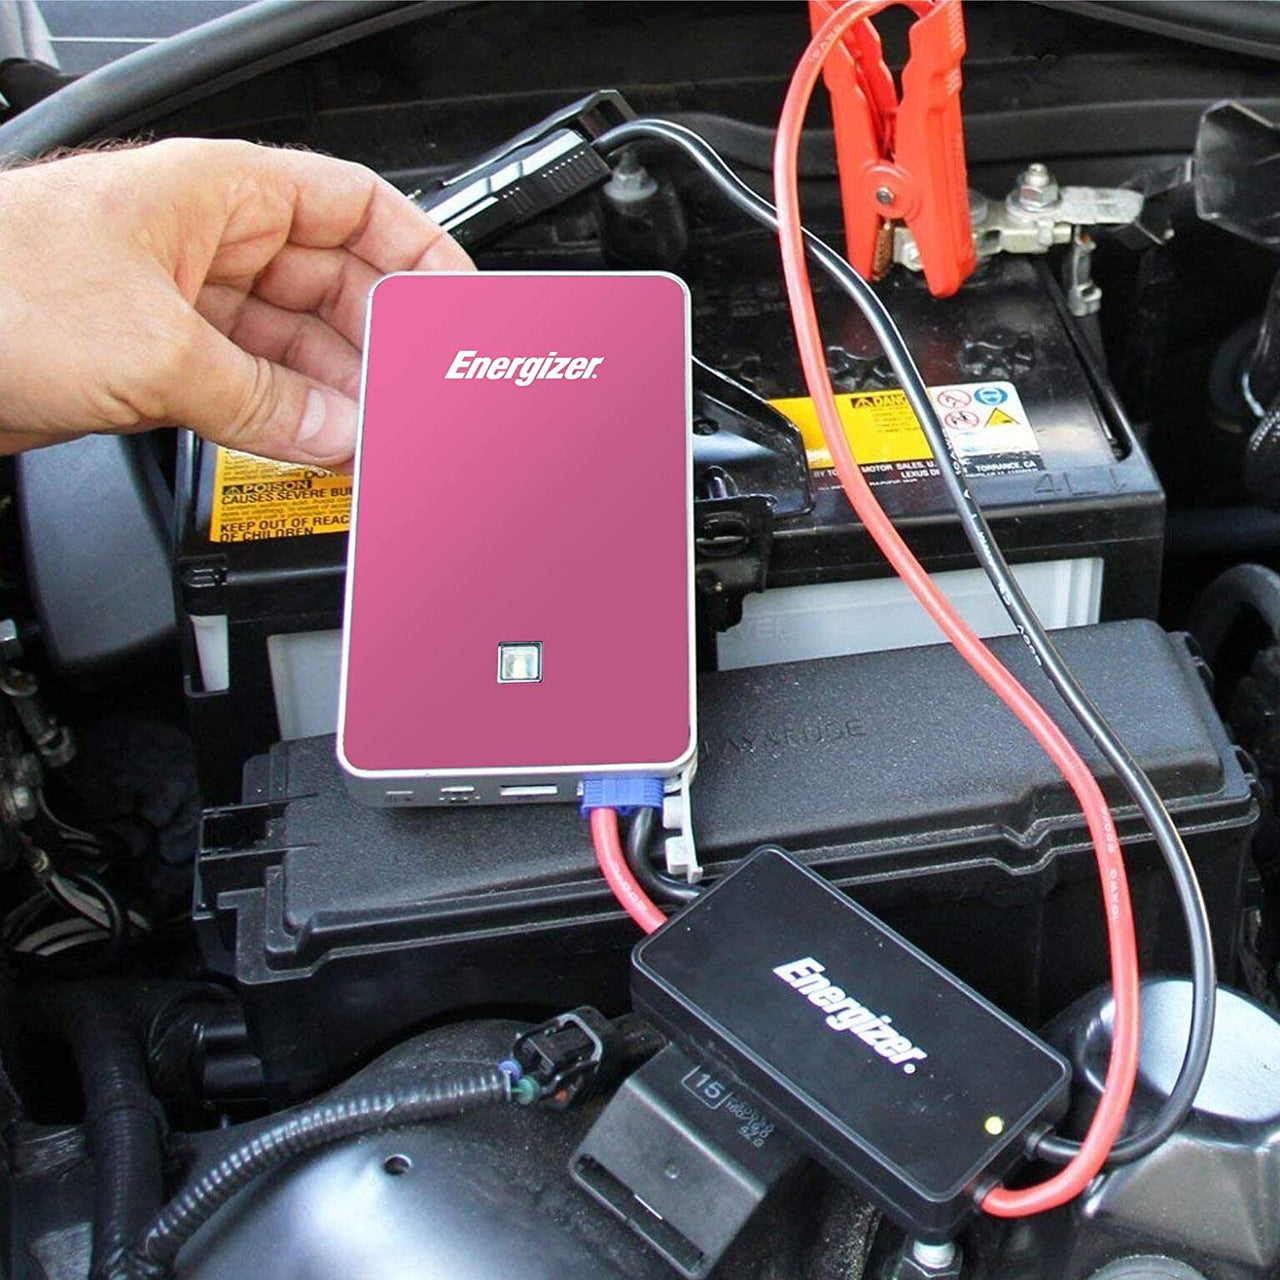 Energizer Heavy Duty Jump Starter 7500mAh with Built-In UL Lithium Battery - Portable Car Jumper and 2.4A Power Bank USB Charger (Pink) - Jump-Starters.com roadside assistance store